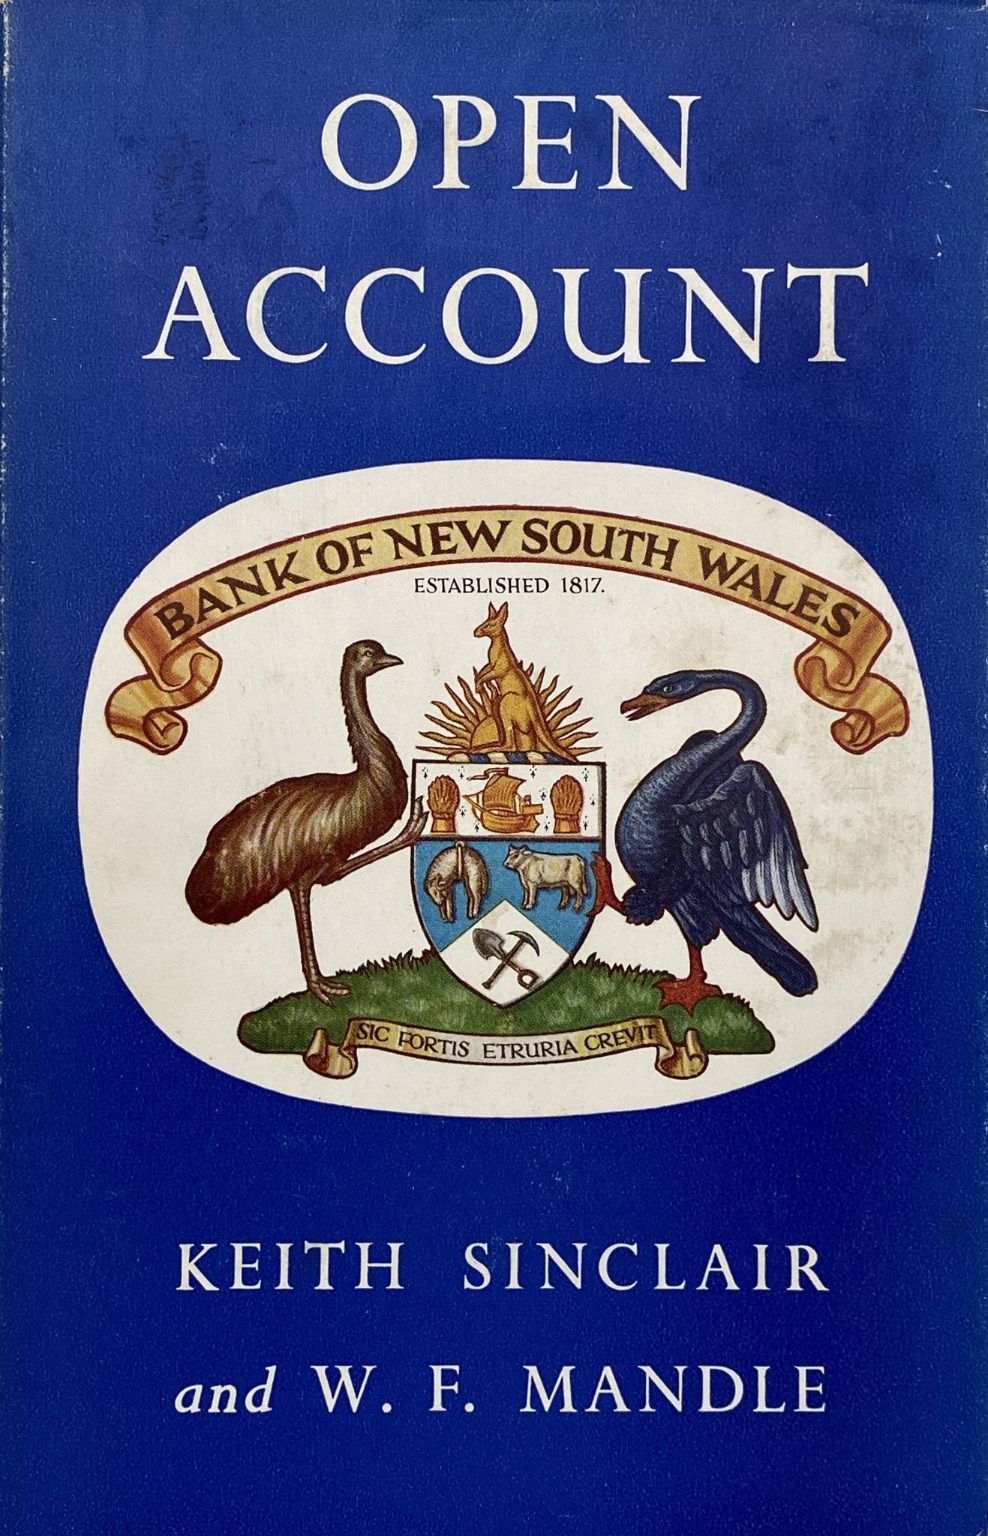 OPEN ACCOUNT: A History of the Bank of New South Wales in New Zealand 1861-1961